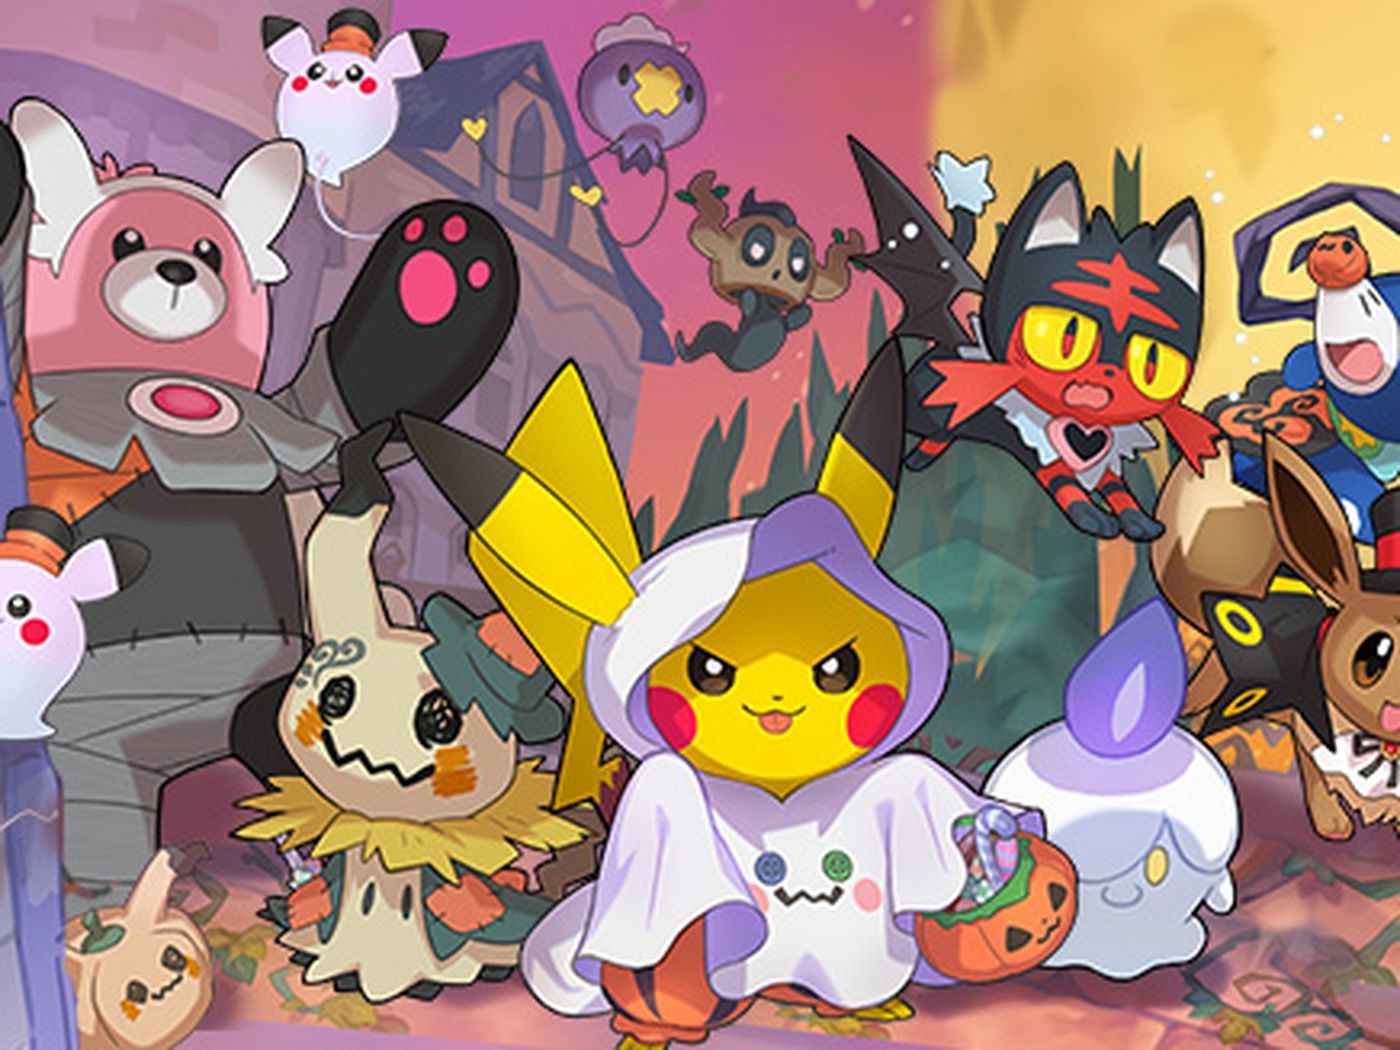 Pokémon Go Halloween event reveal has players sure new monsters are on the way